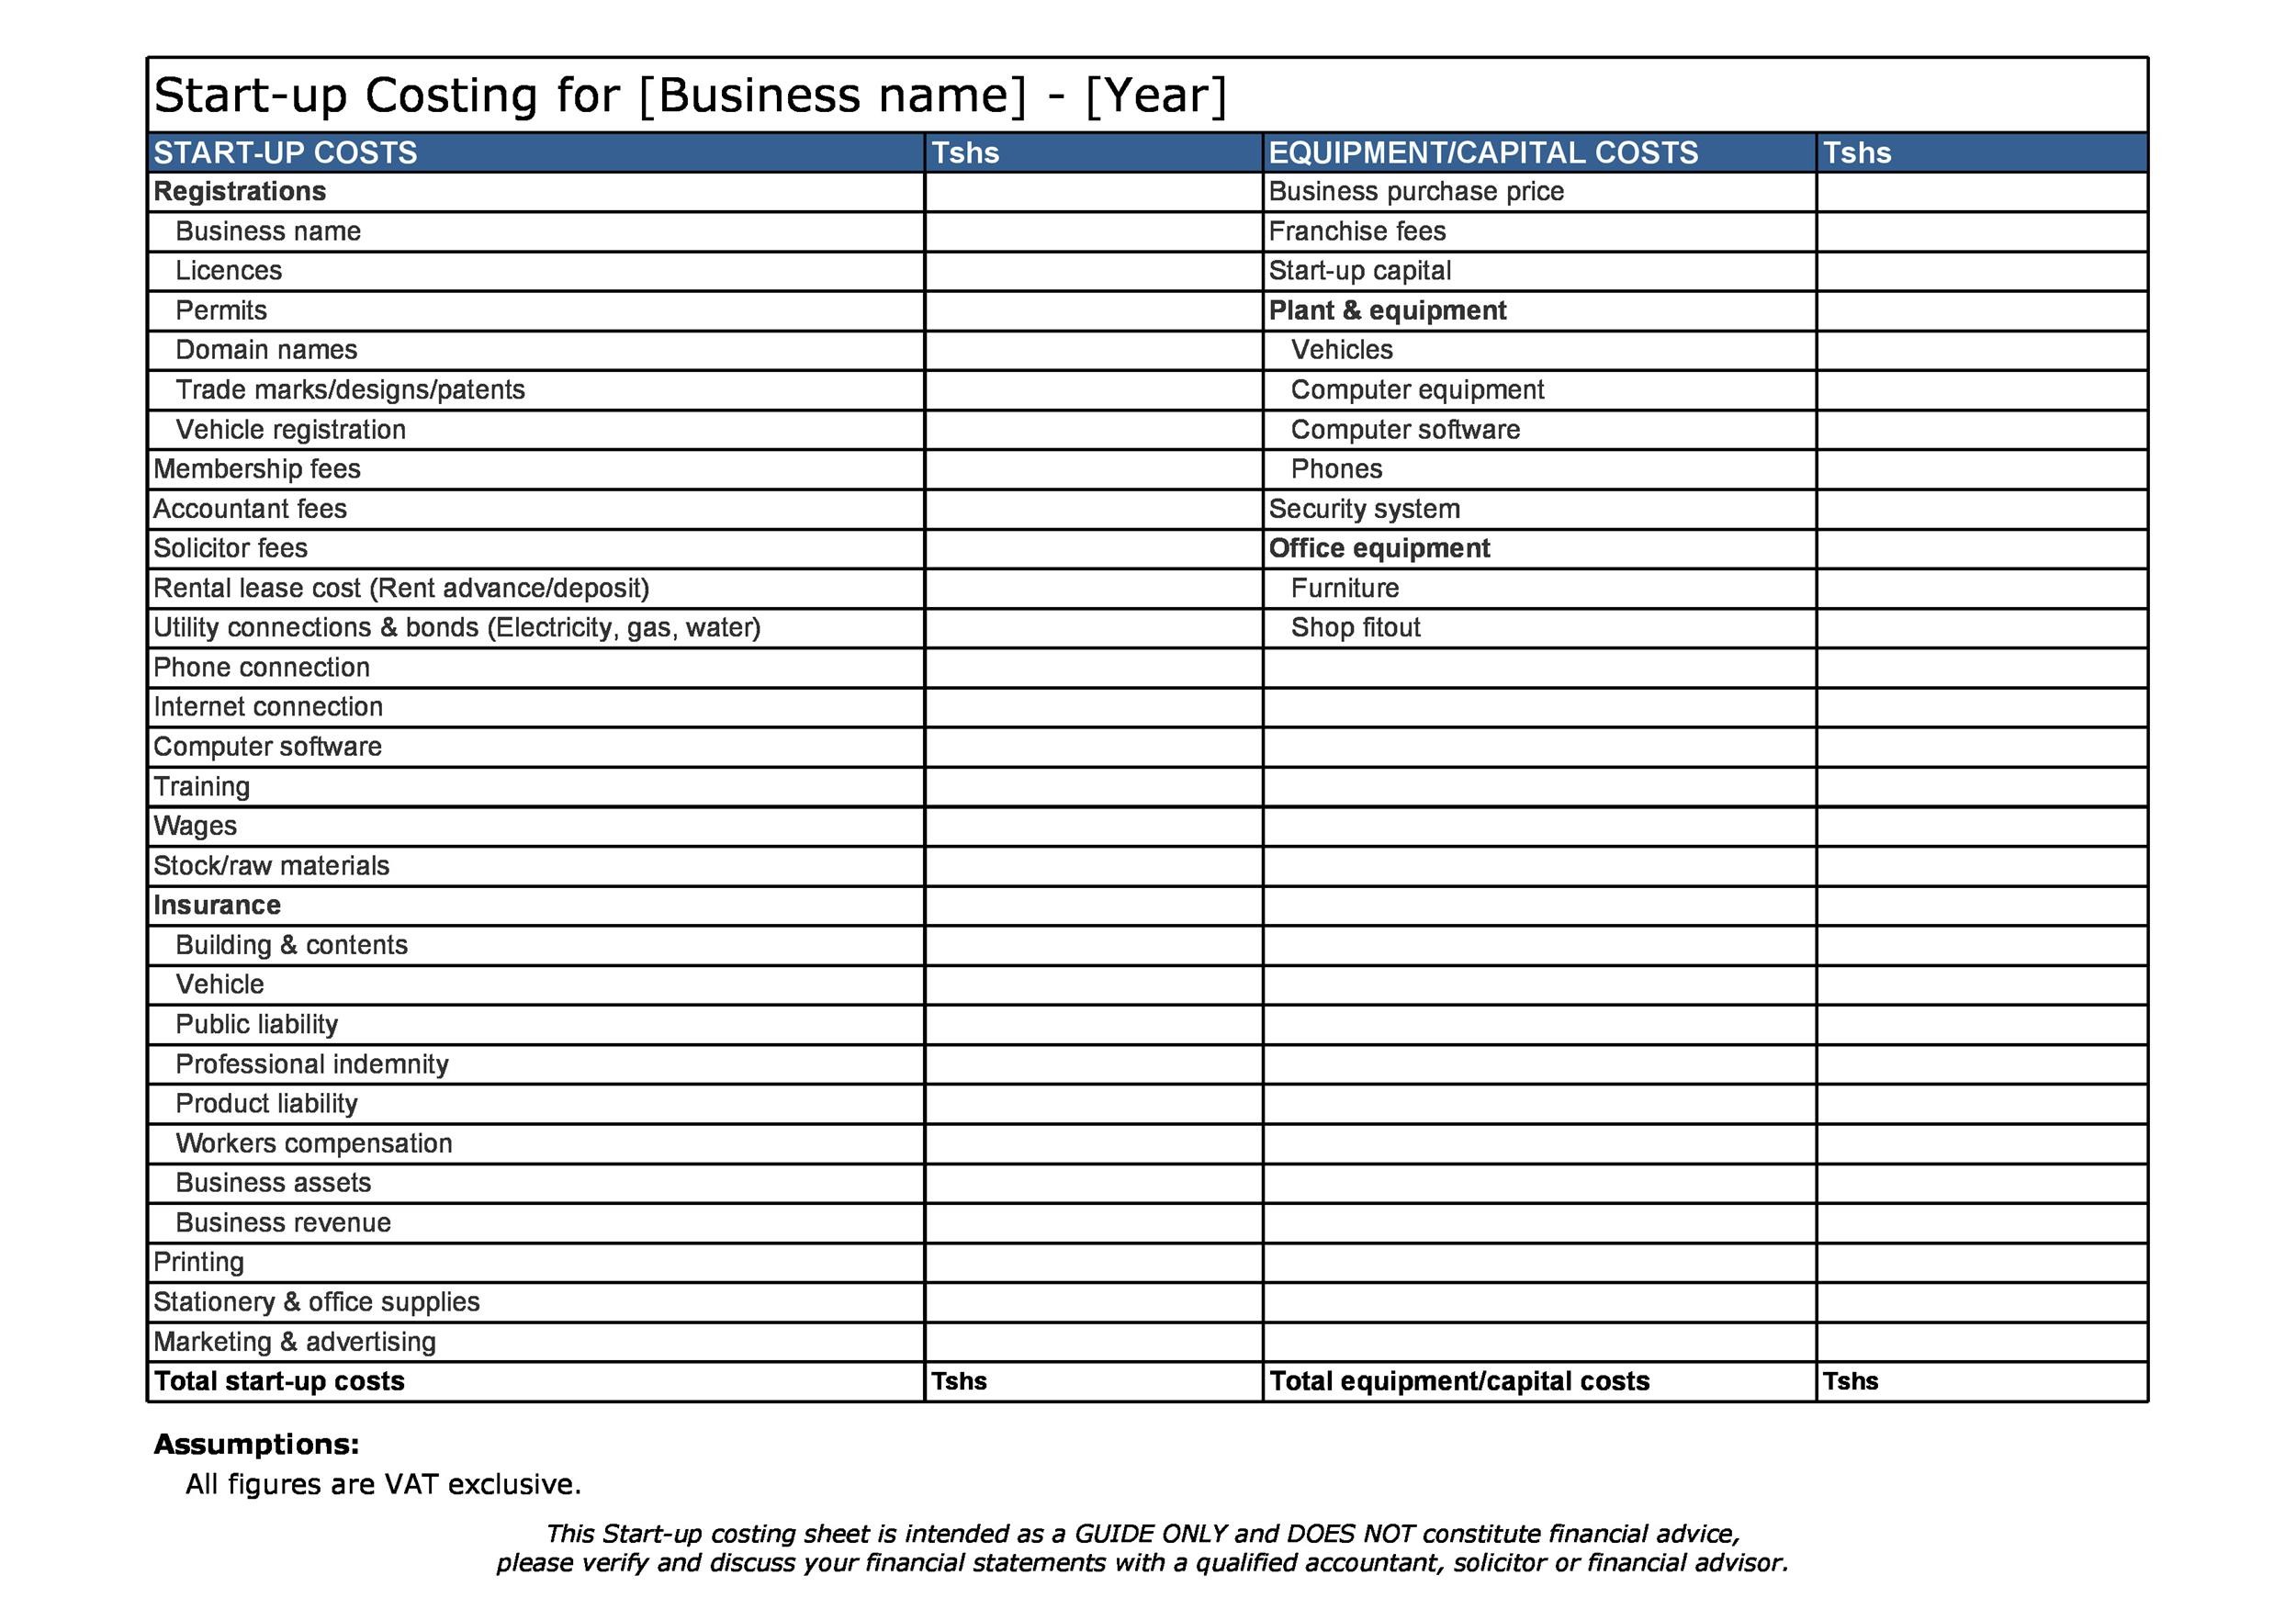 startup business budget template excel